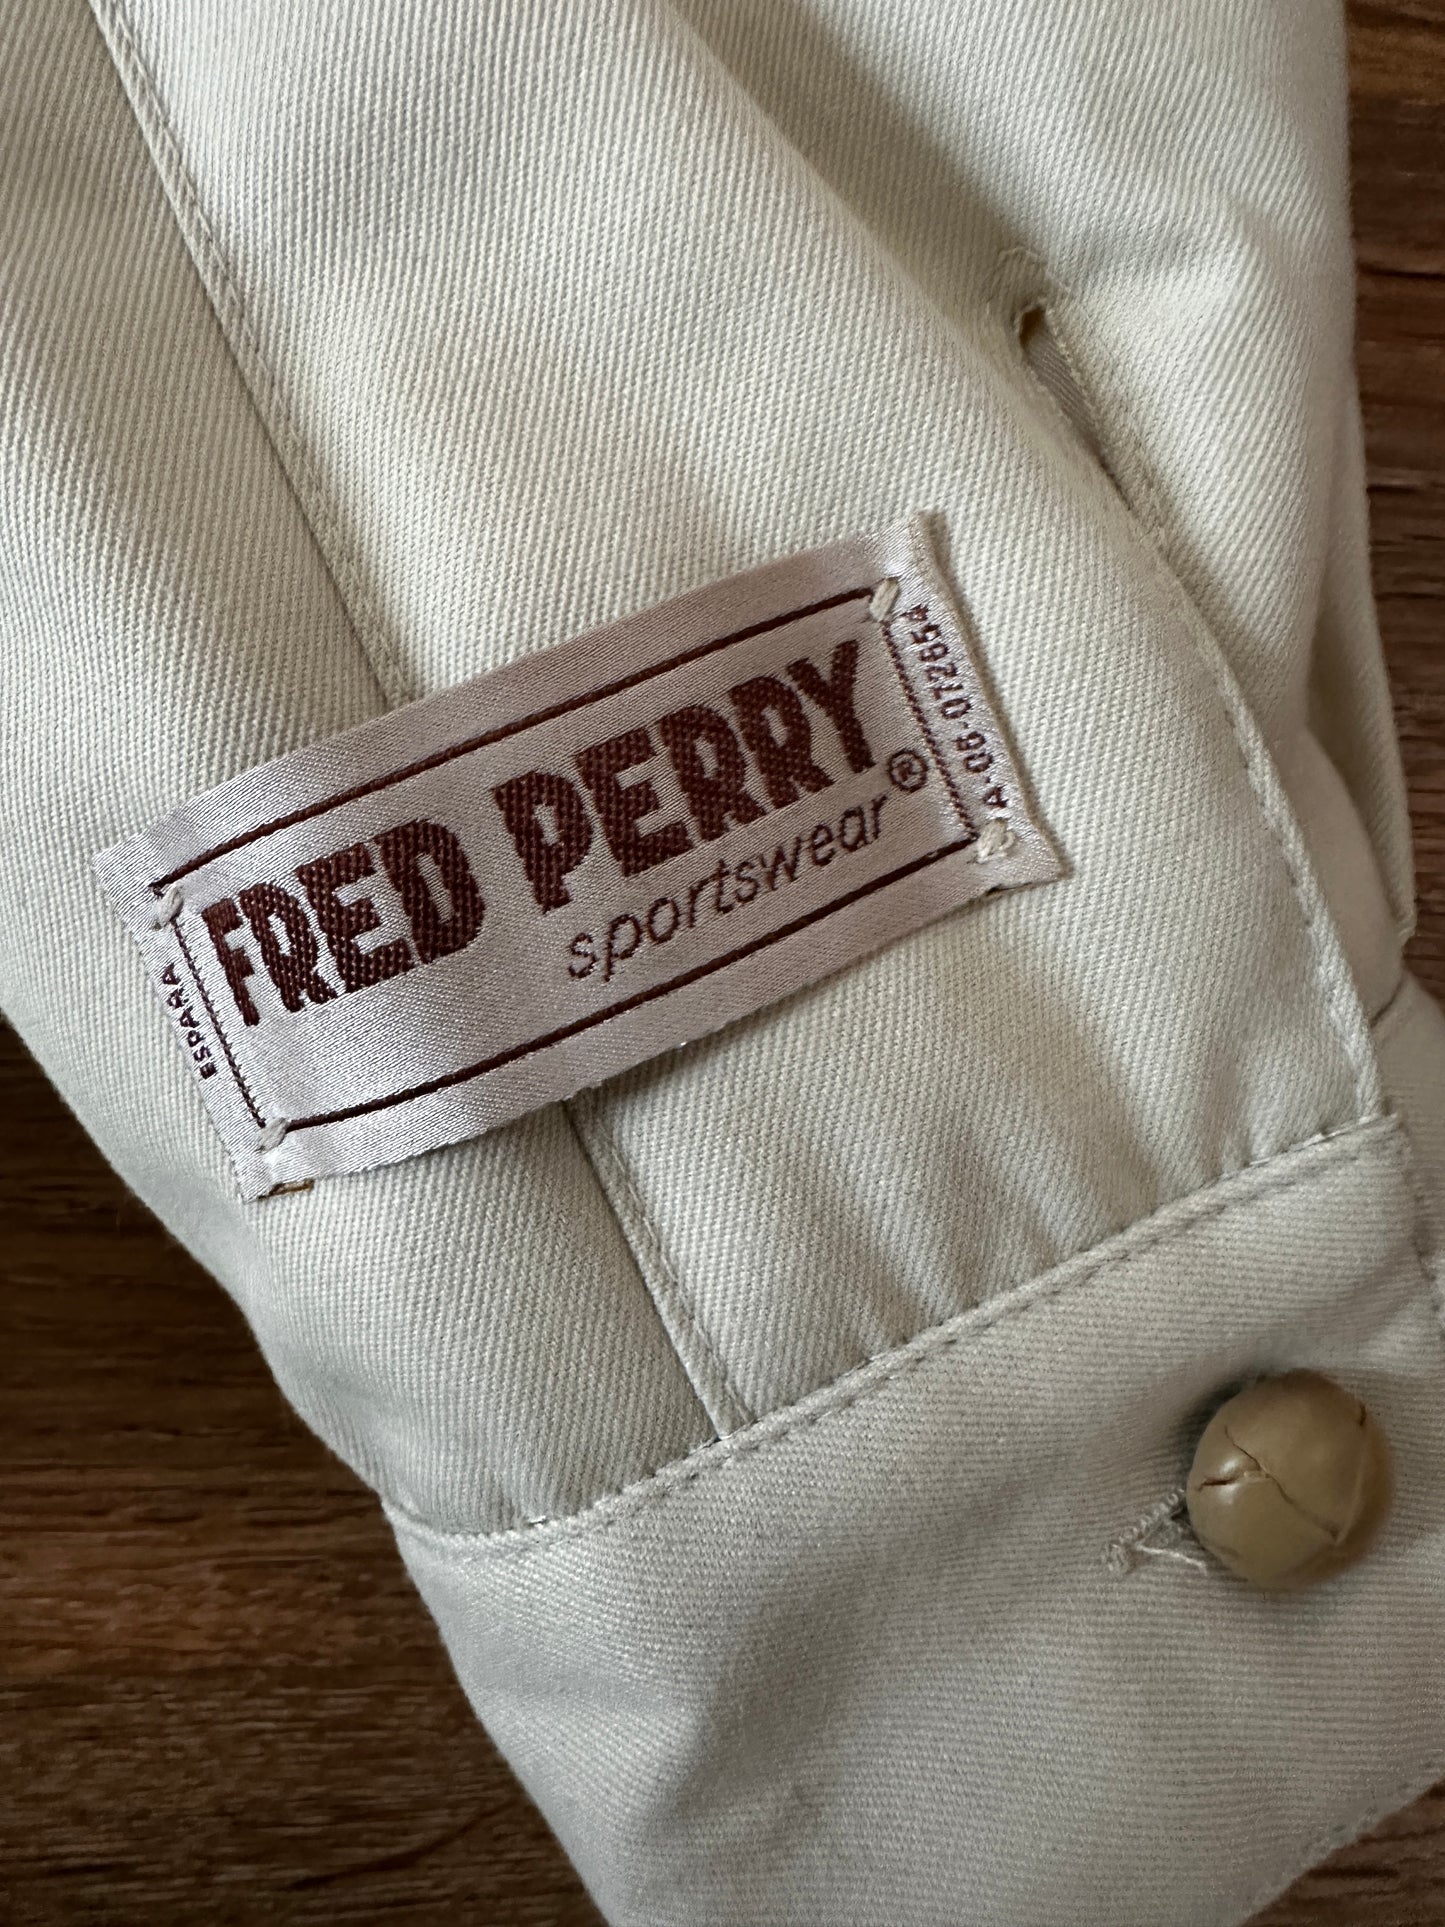 Fred Perry Anorak Brown-beige - Deadstock - 54 / L - Made in Spain